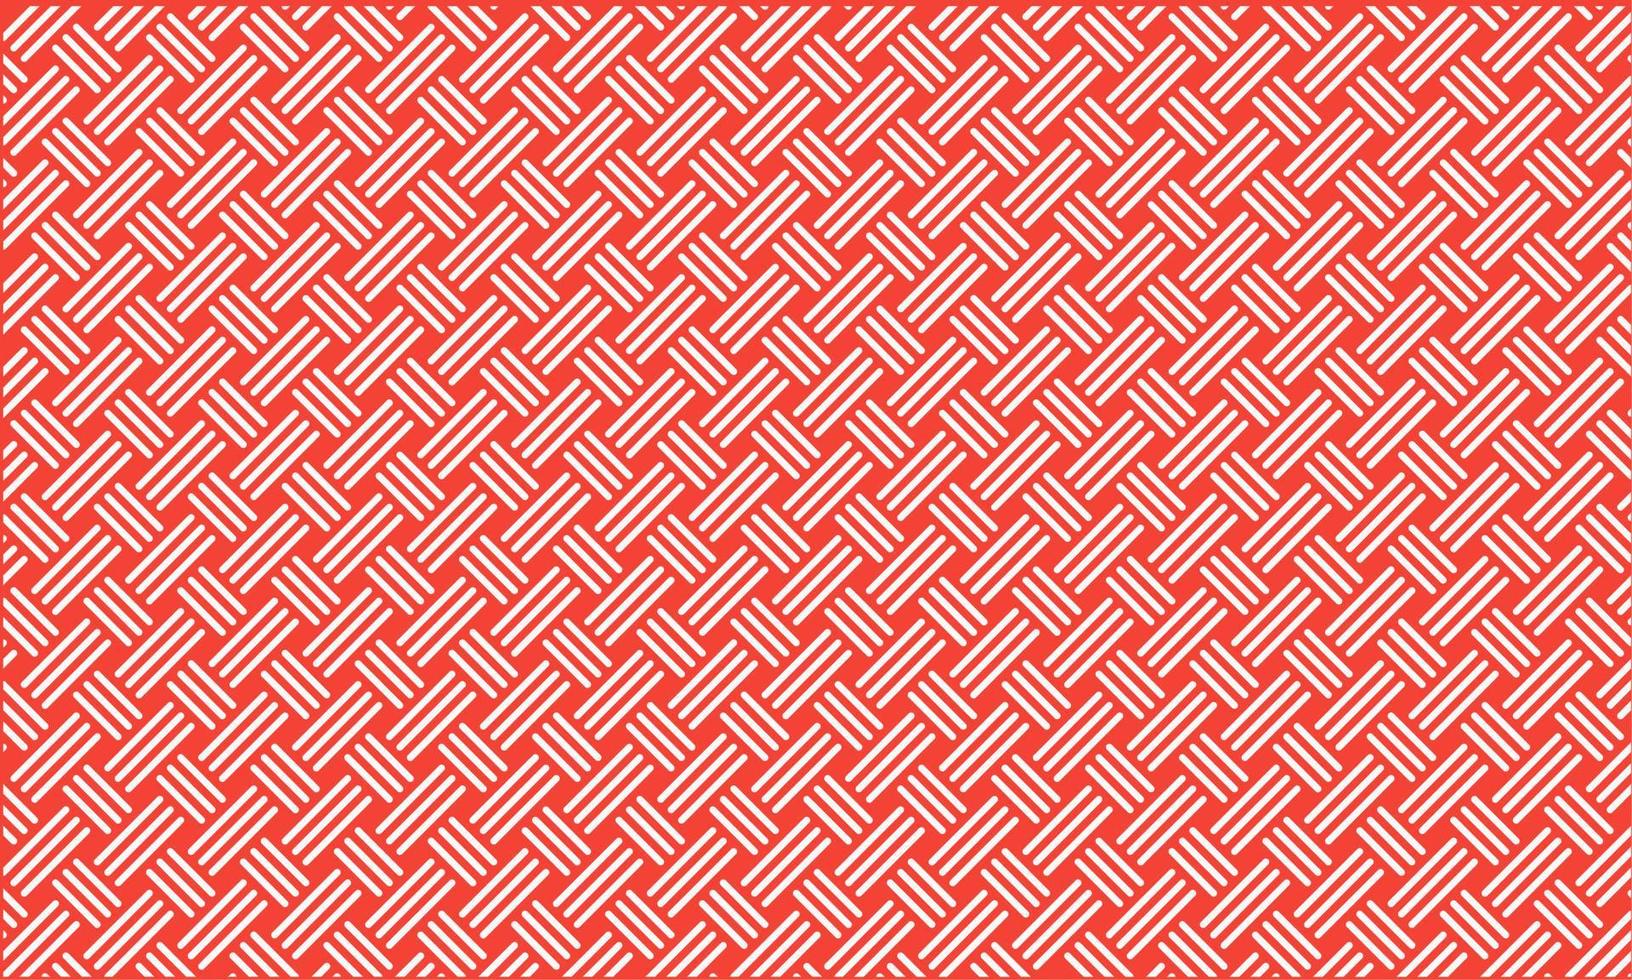 Abstract striped background with geometric pattern and straight shape vector